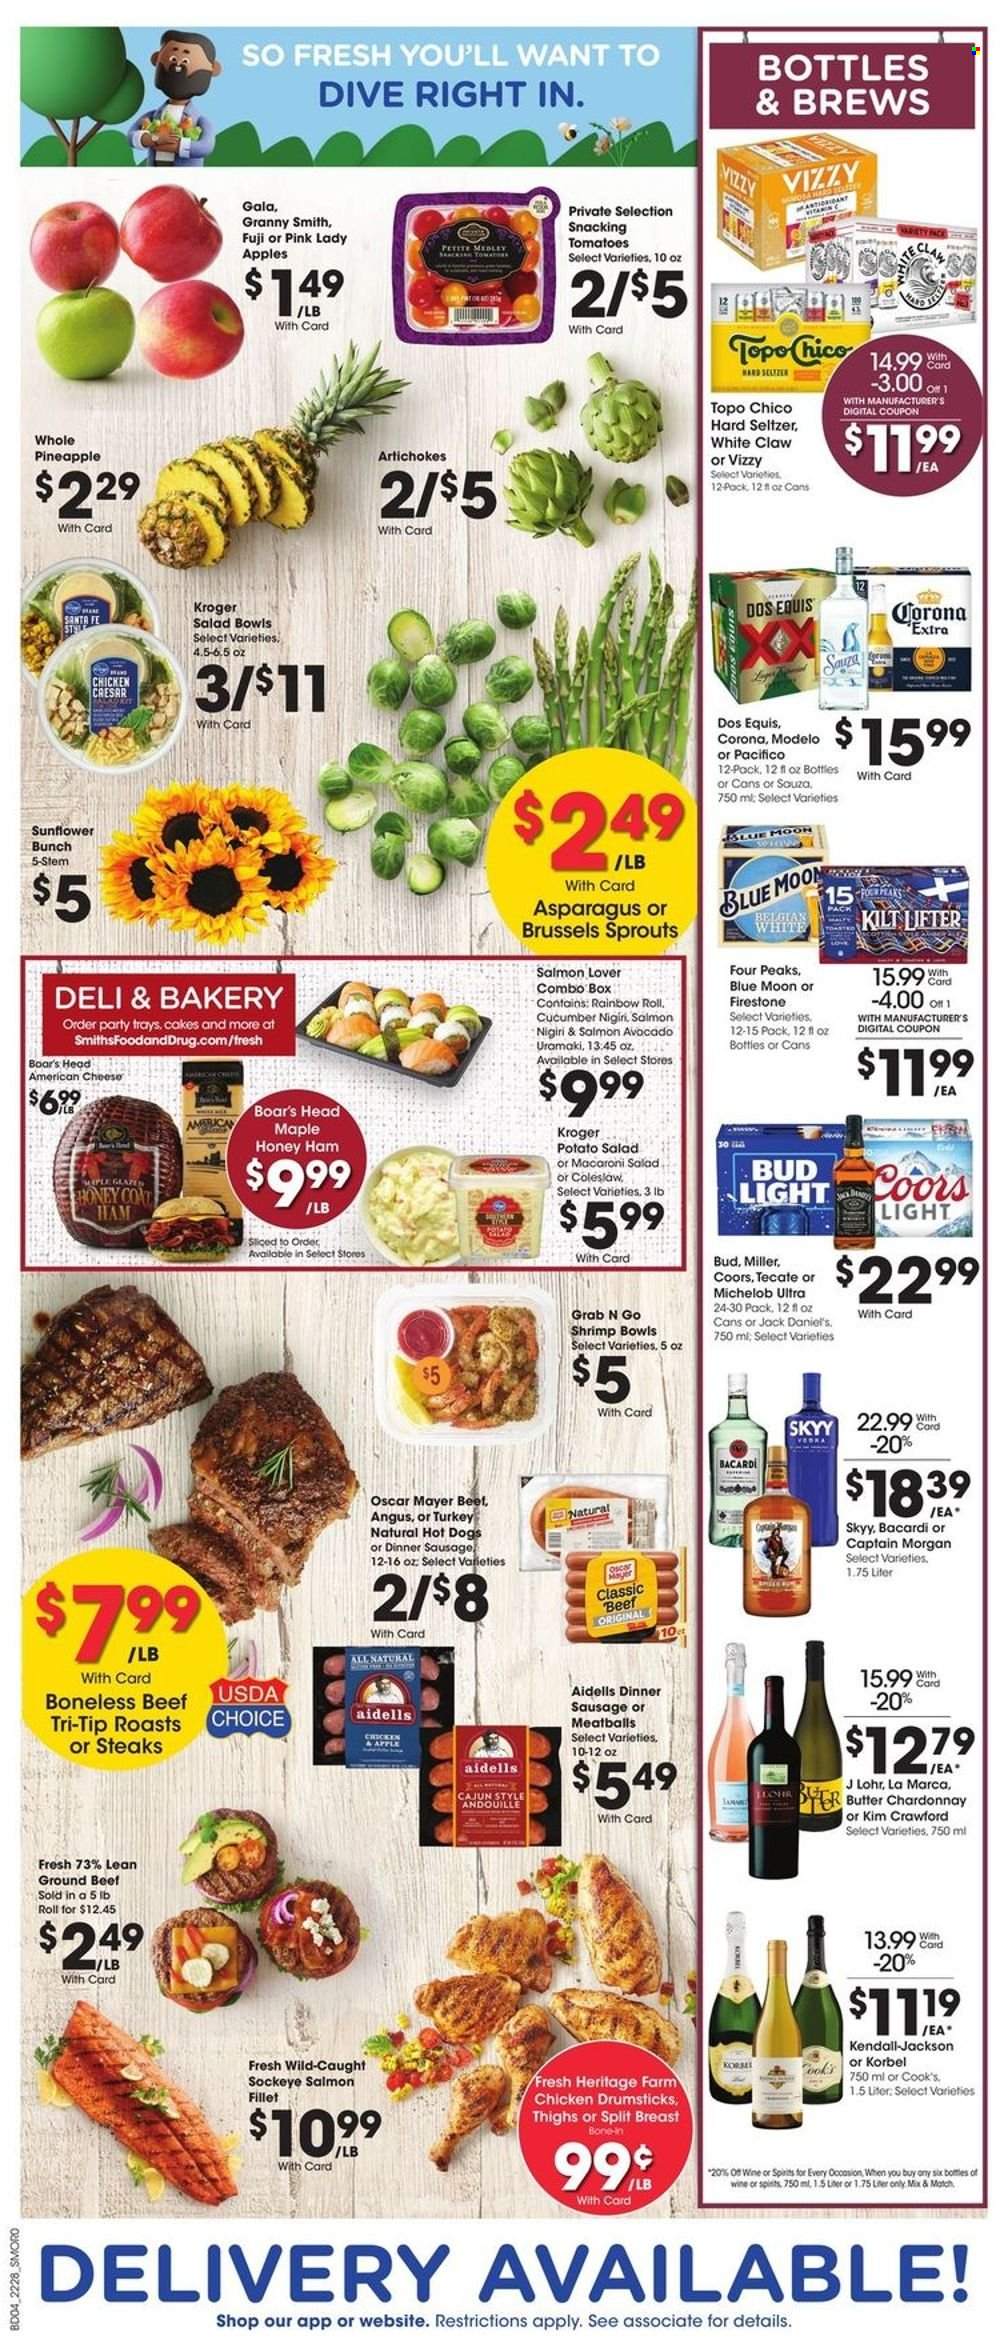 thumbnail - Smith's Flyer - 08/10/2022 - 08/16/2022 - Sales products - cake, artichoke, asparagus, tomatoes, brussel sprouts, apples, avocado, Gala, pineapple, Granny Smith, Pink Lady, salmon, salmon fillet, shrimps, coleslaw, hot dog, Jack Daniel's, meatballs, ham, Cook's, Oscar Mayer, sausage, potato salad, macaroni salad, american cheese, cheese, butter, white wine, Chardonnay, wine, Bacardi, Captain Morgan, vodka, SKYY, White Claw, Hard Seltzer, beer, Bud Light, Corona Extra, Miller, Modelo, chicken drumsticks, beef meat, ground beef, steak, salad bowl, Coors, Dos Equis, Blue Moon, Michelob. Page 3.